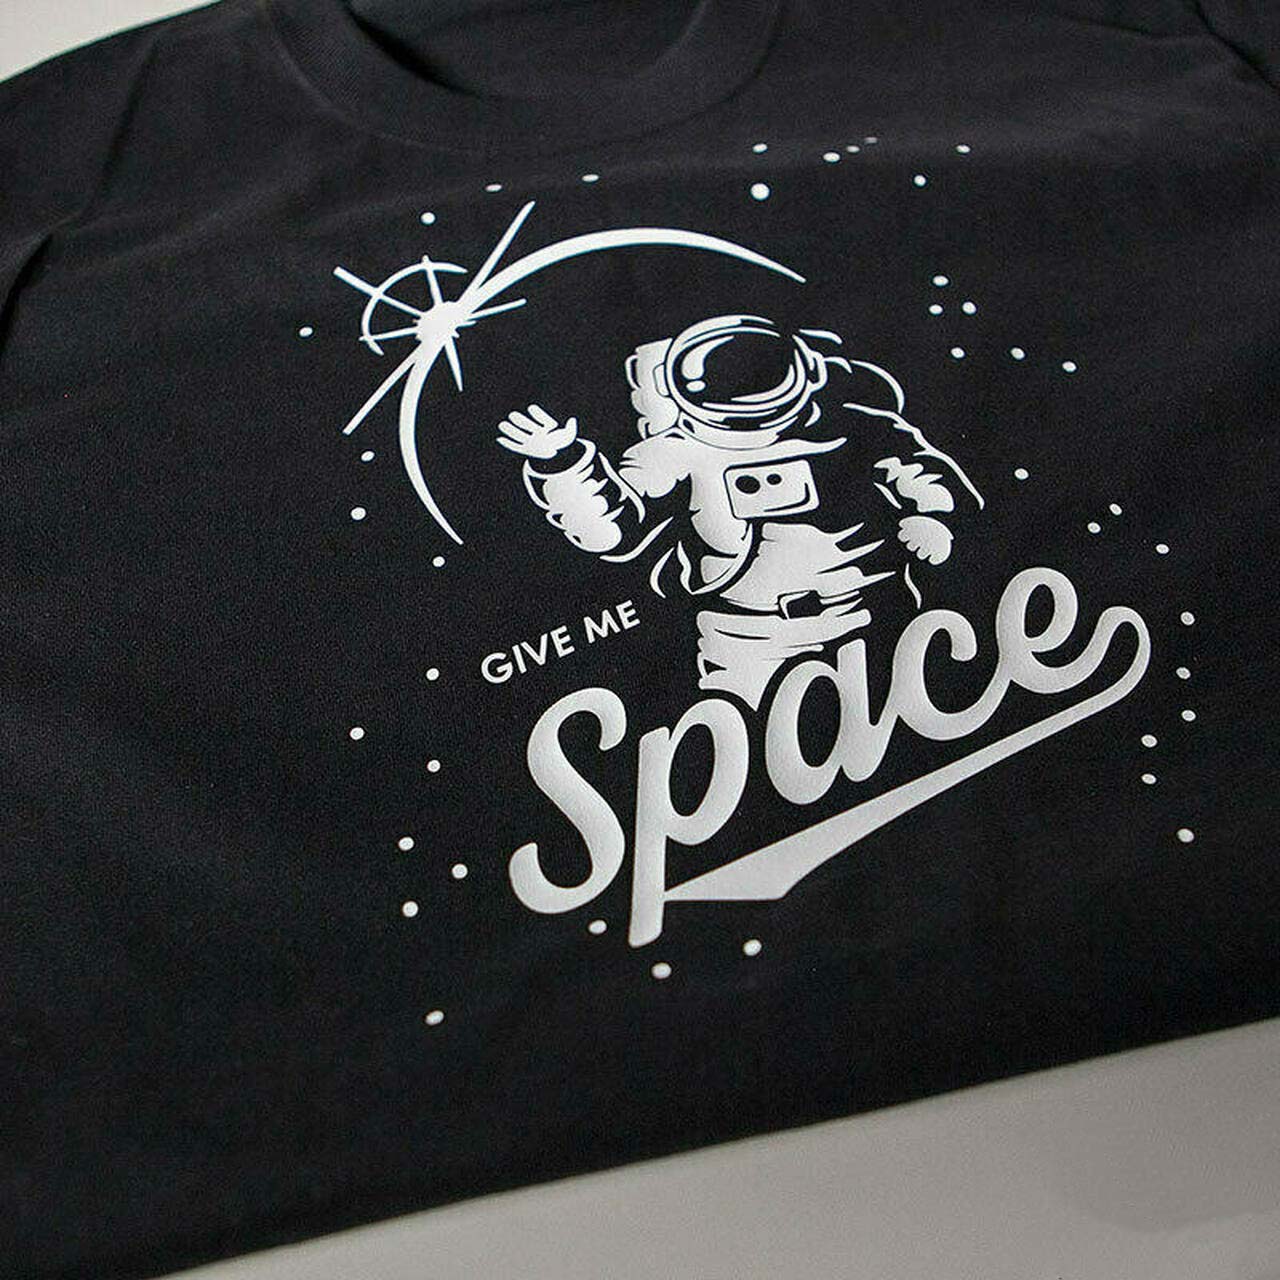 Give me space black shirt